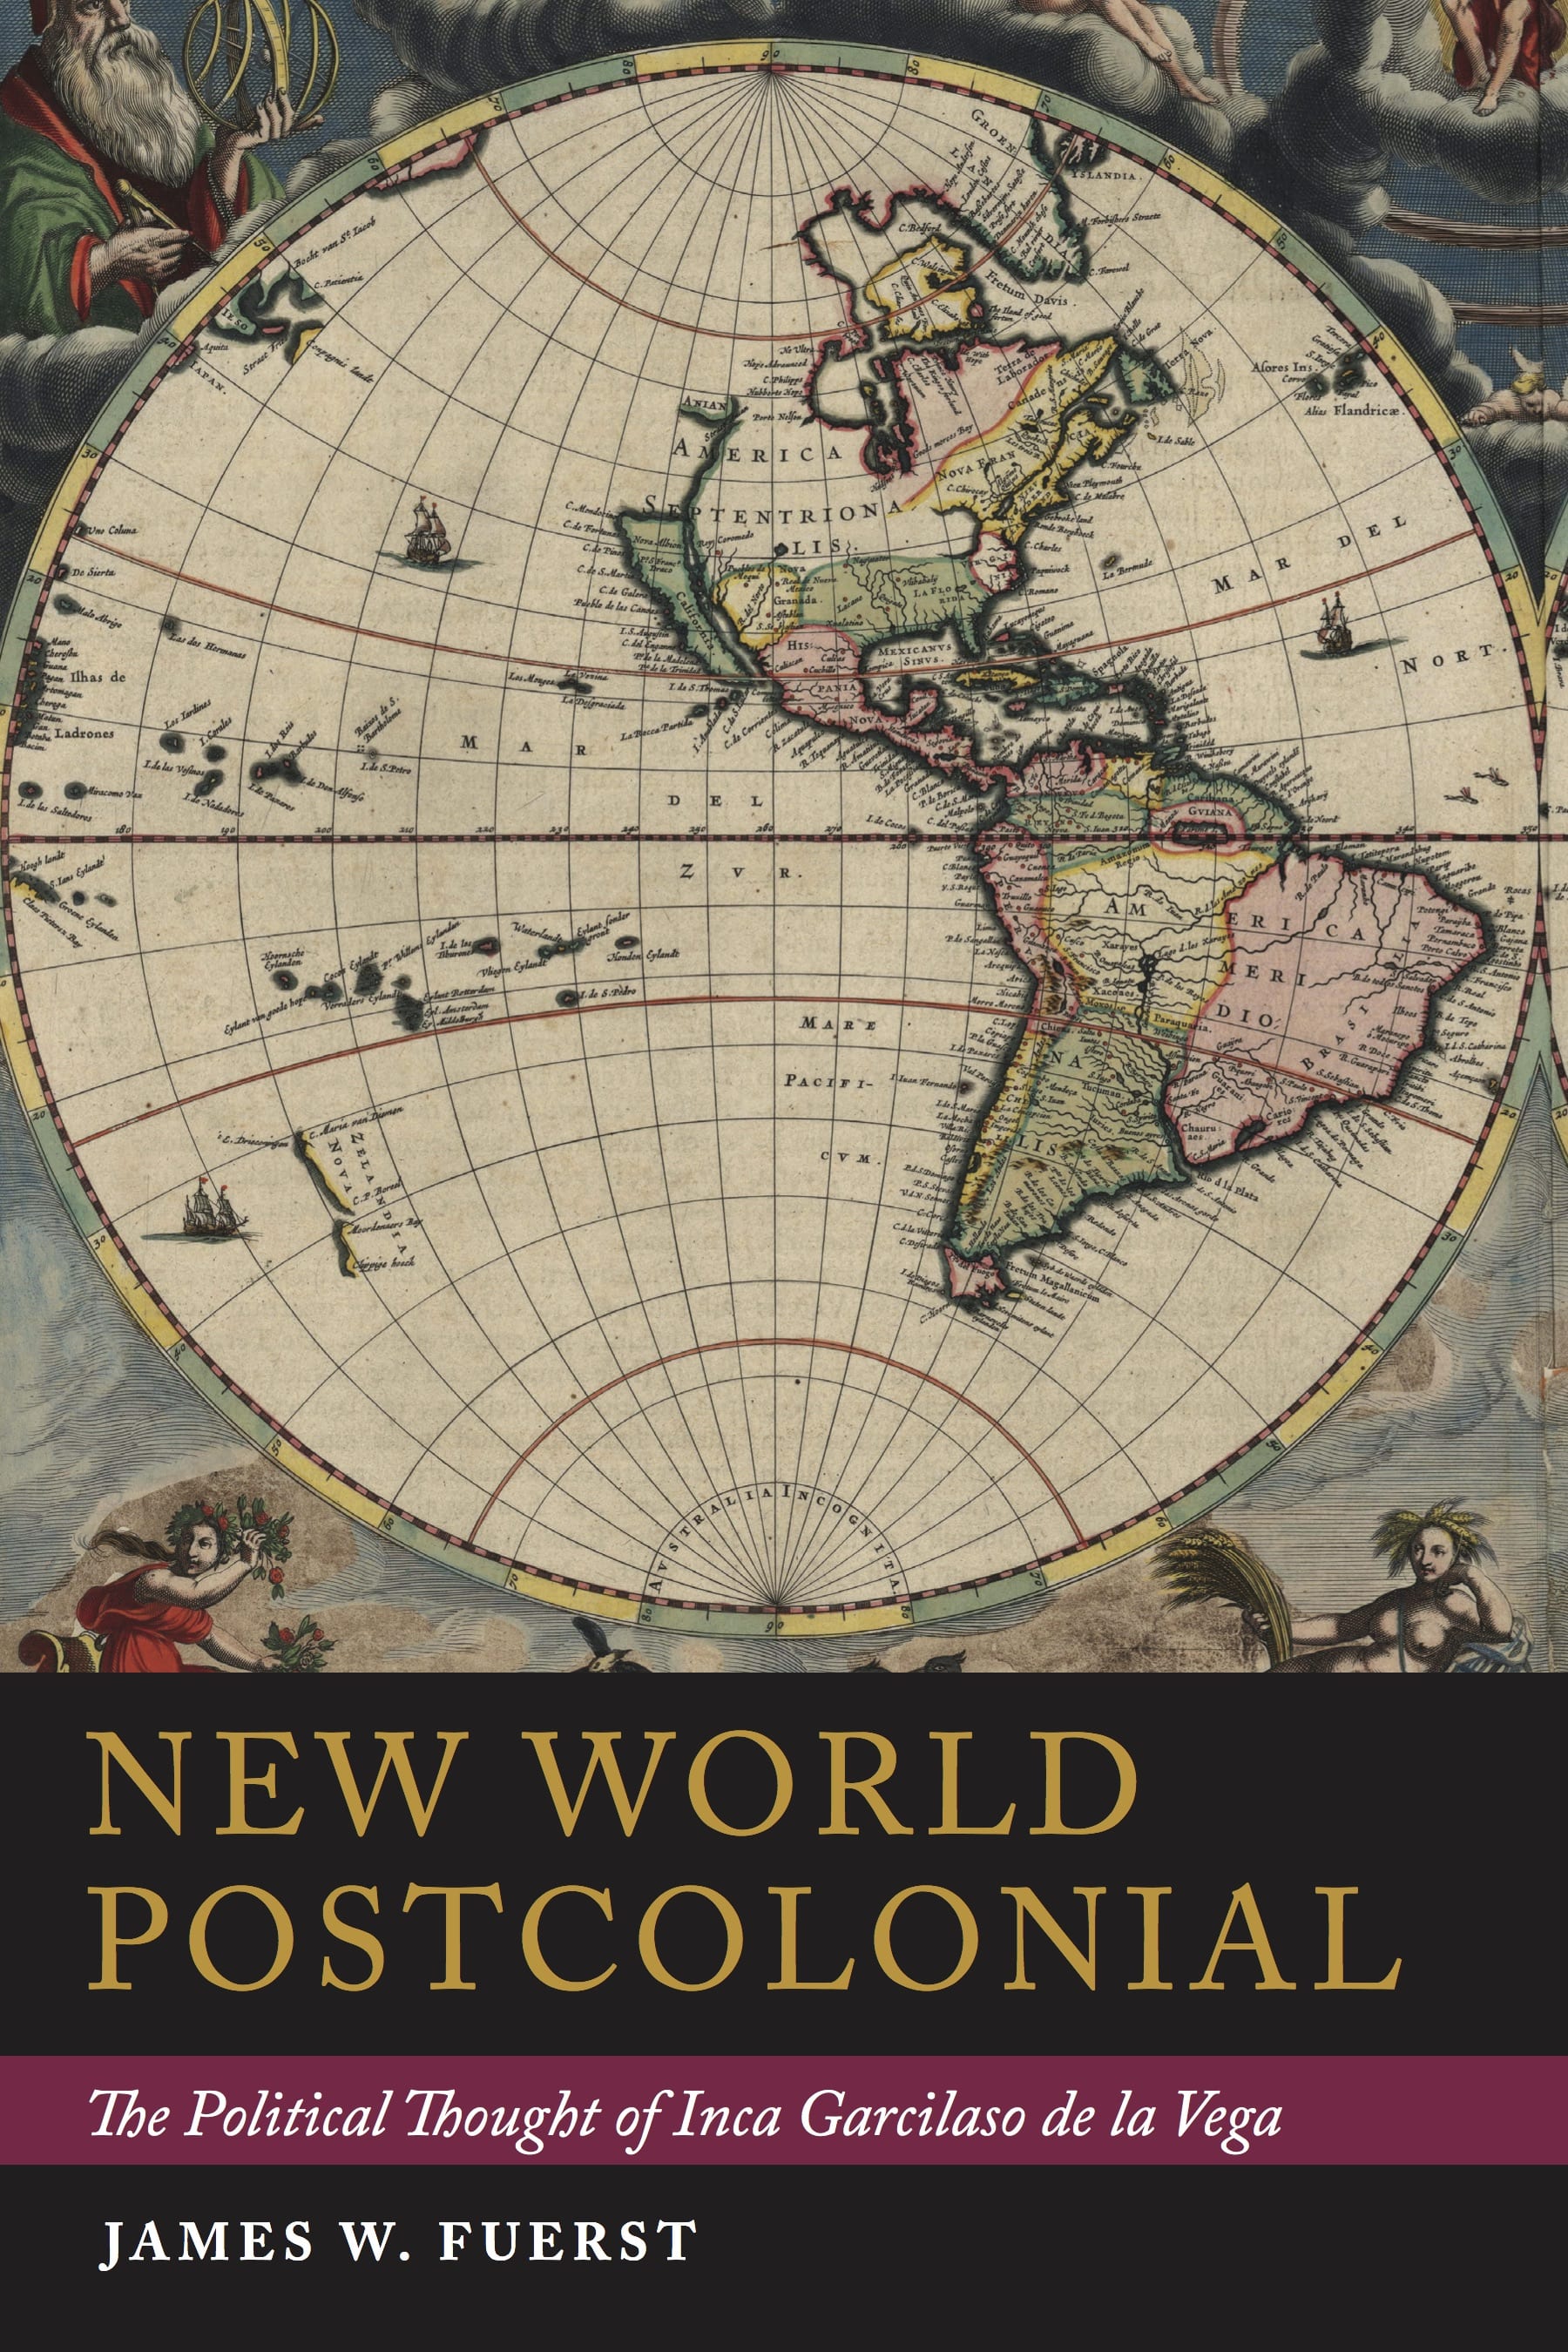 New book by James Fuerst: New World Postcolonial